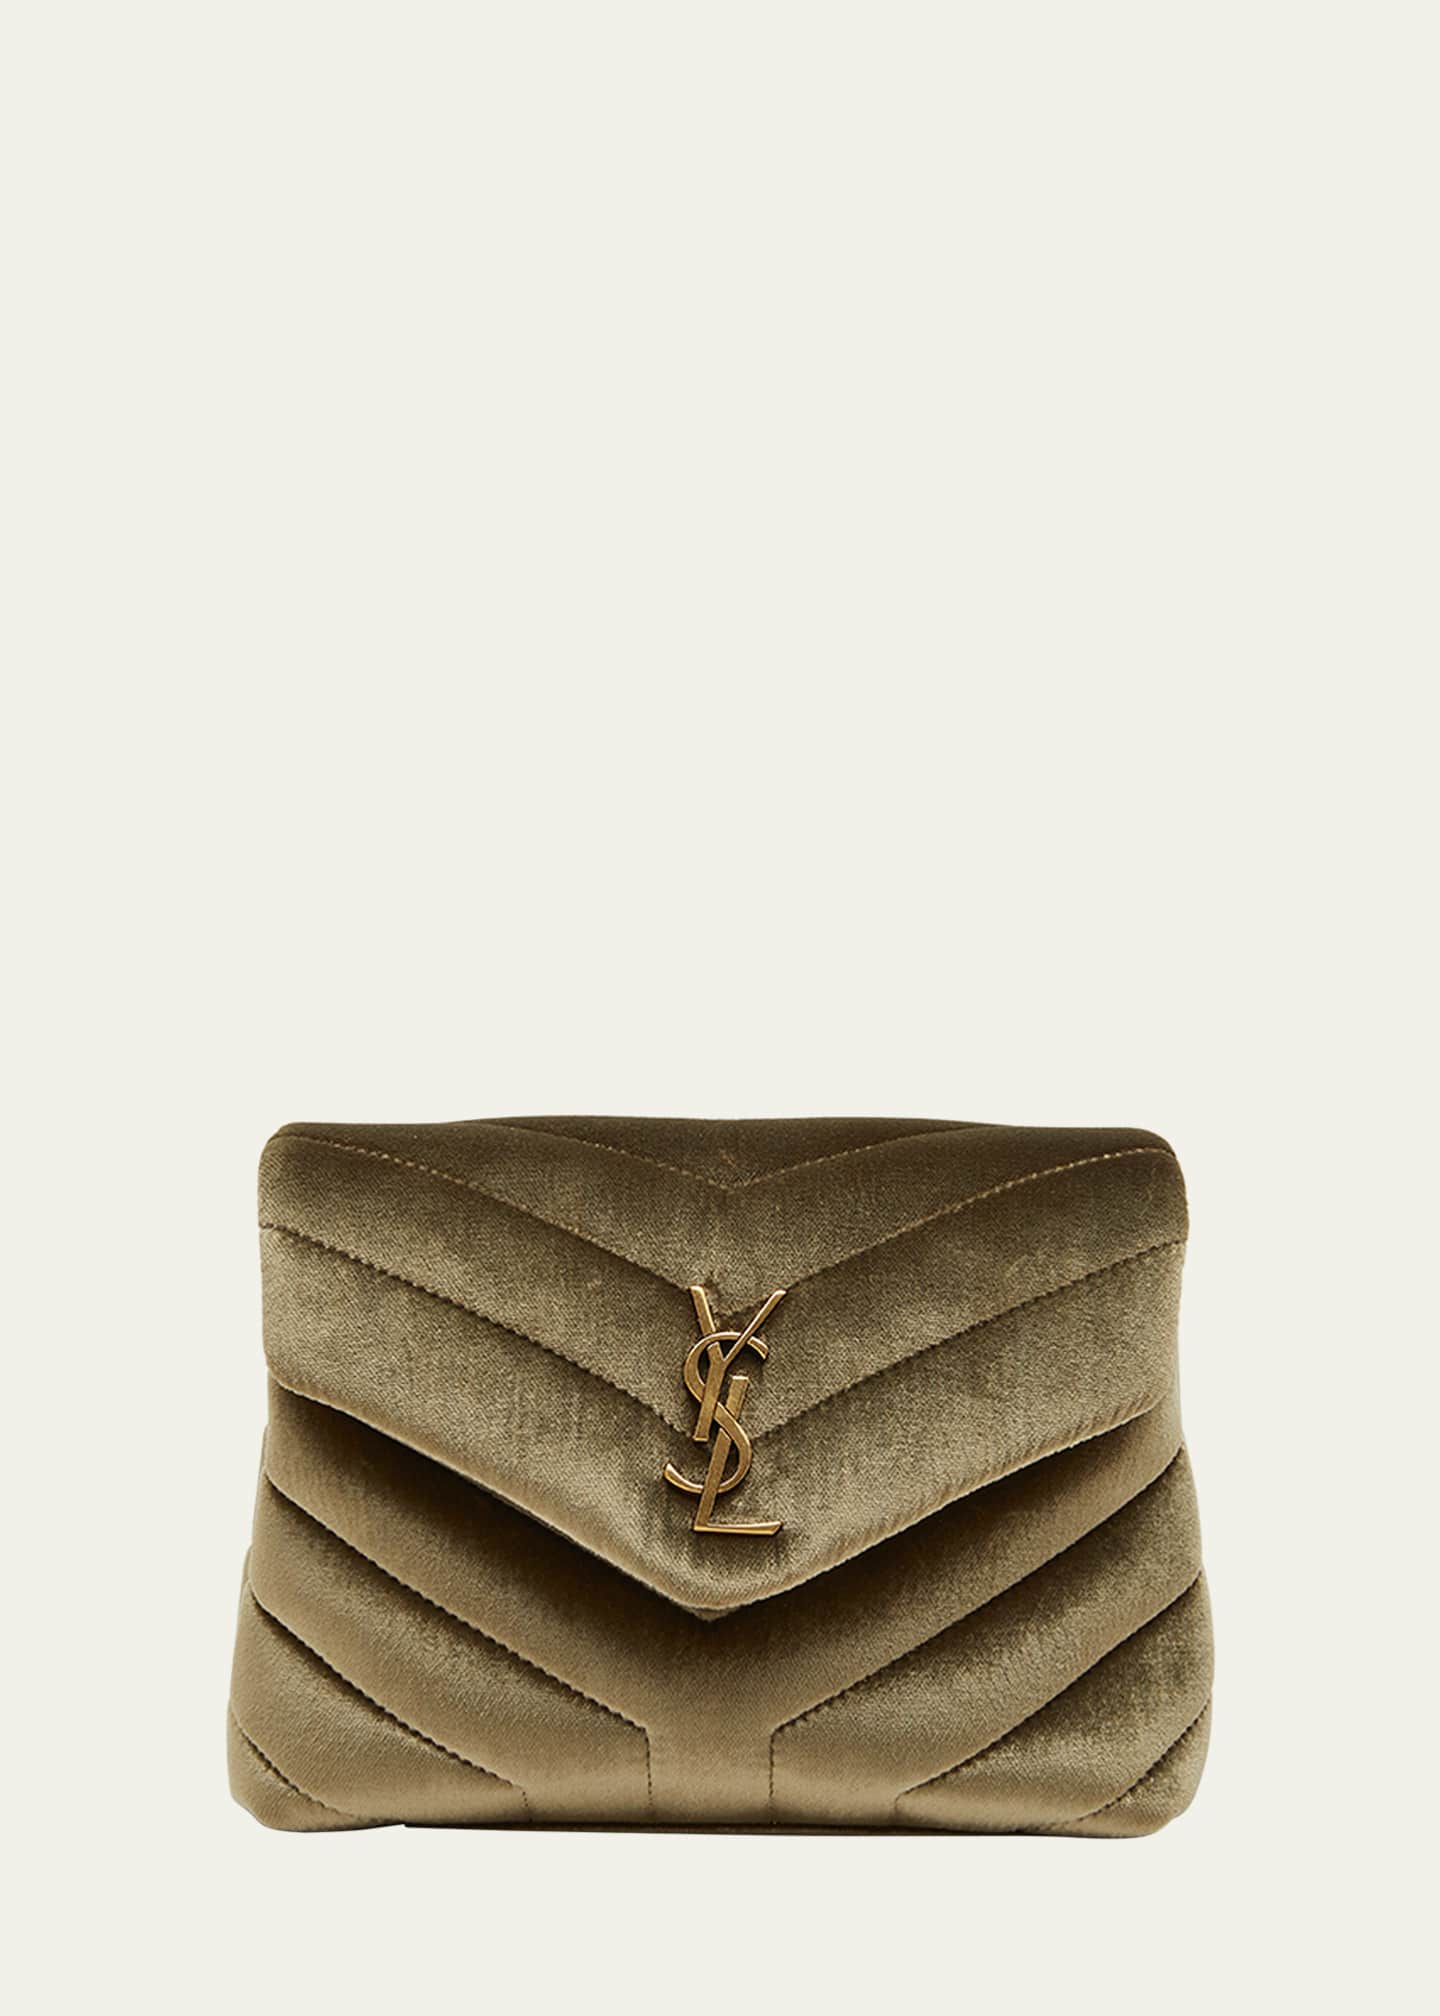 Saint Laurent Loulou Small Suede Shoulder Bag in Green